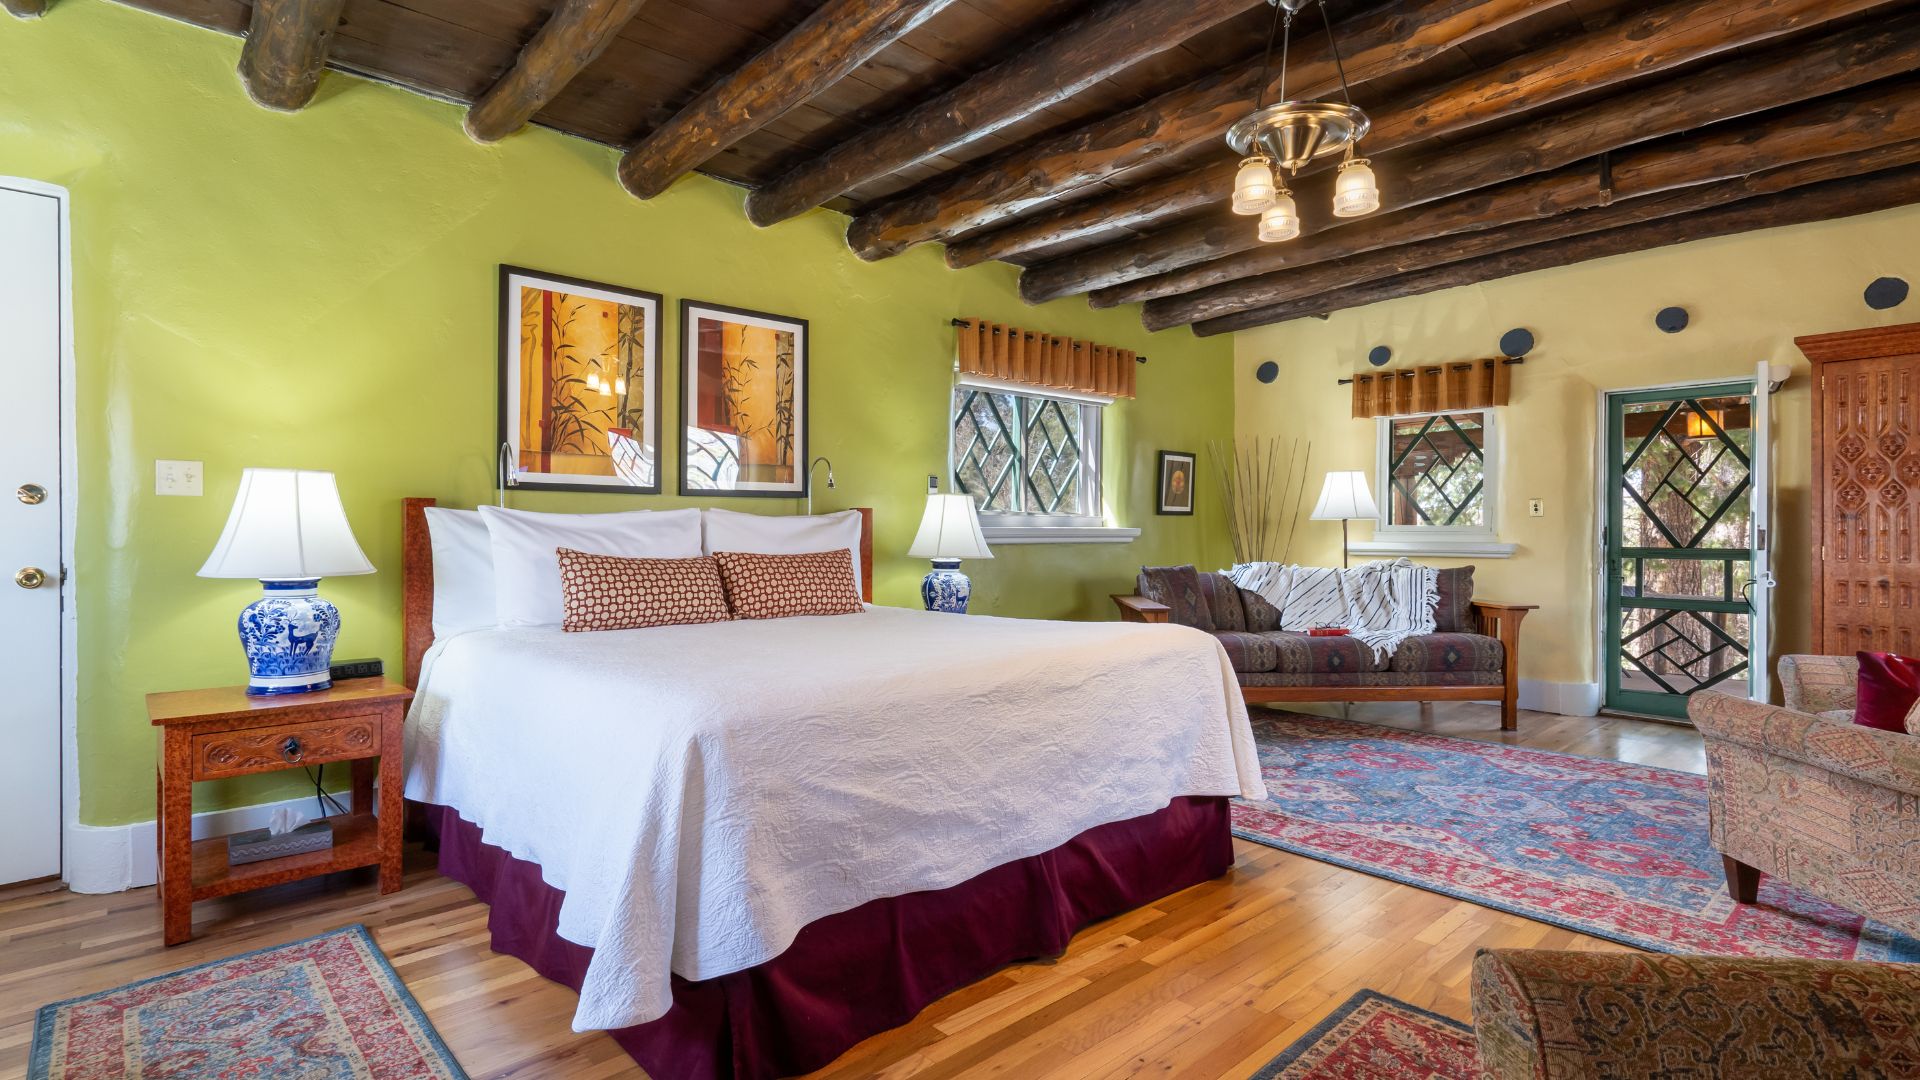 Witter Bynner guest room with lime green walls, wood ceiling beams, spacious with wood floors and exterior door